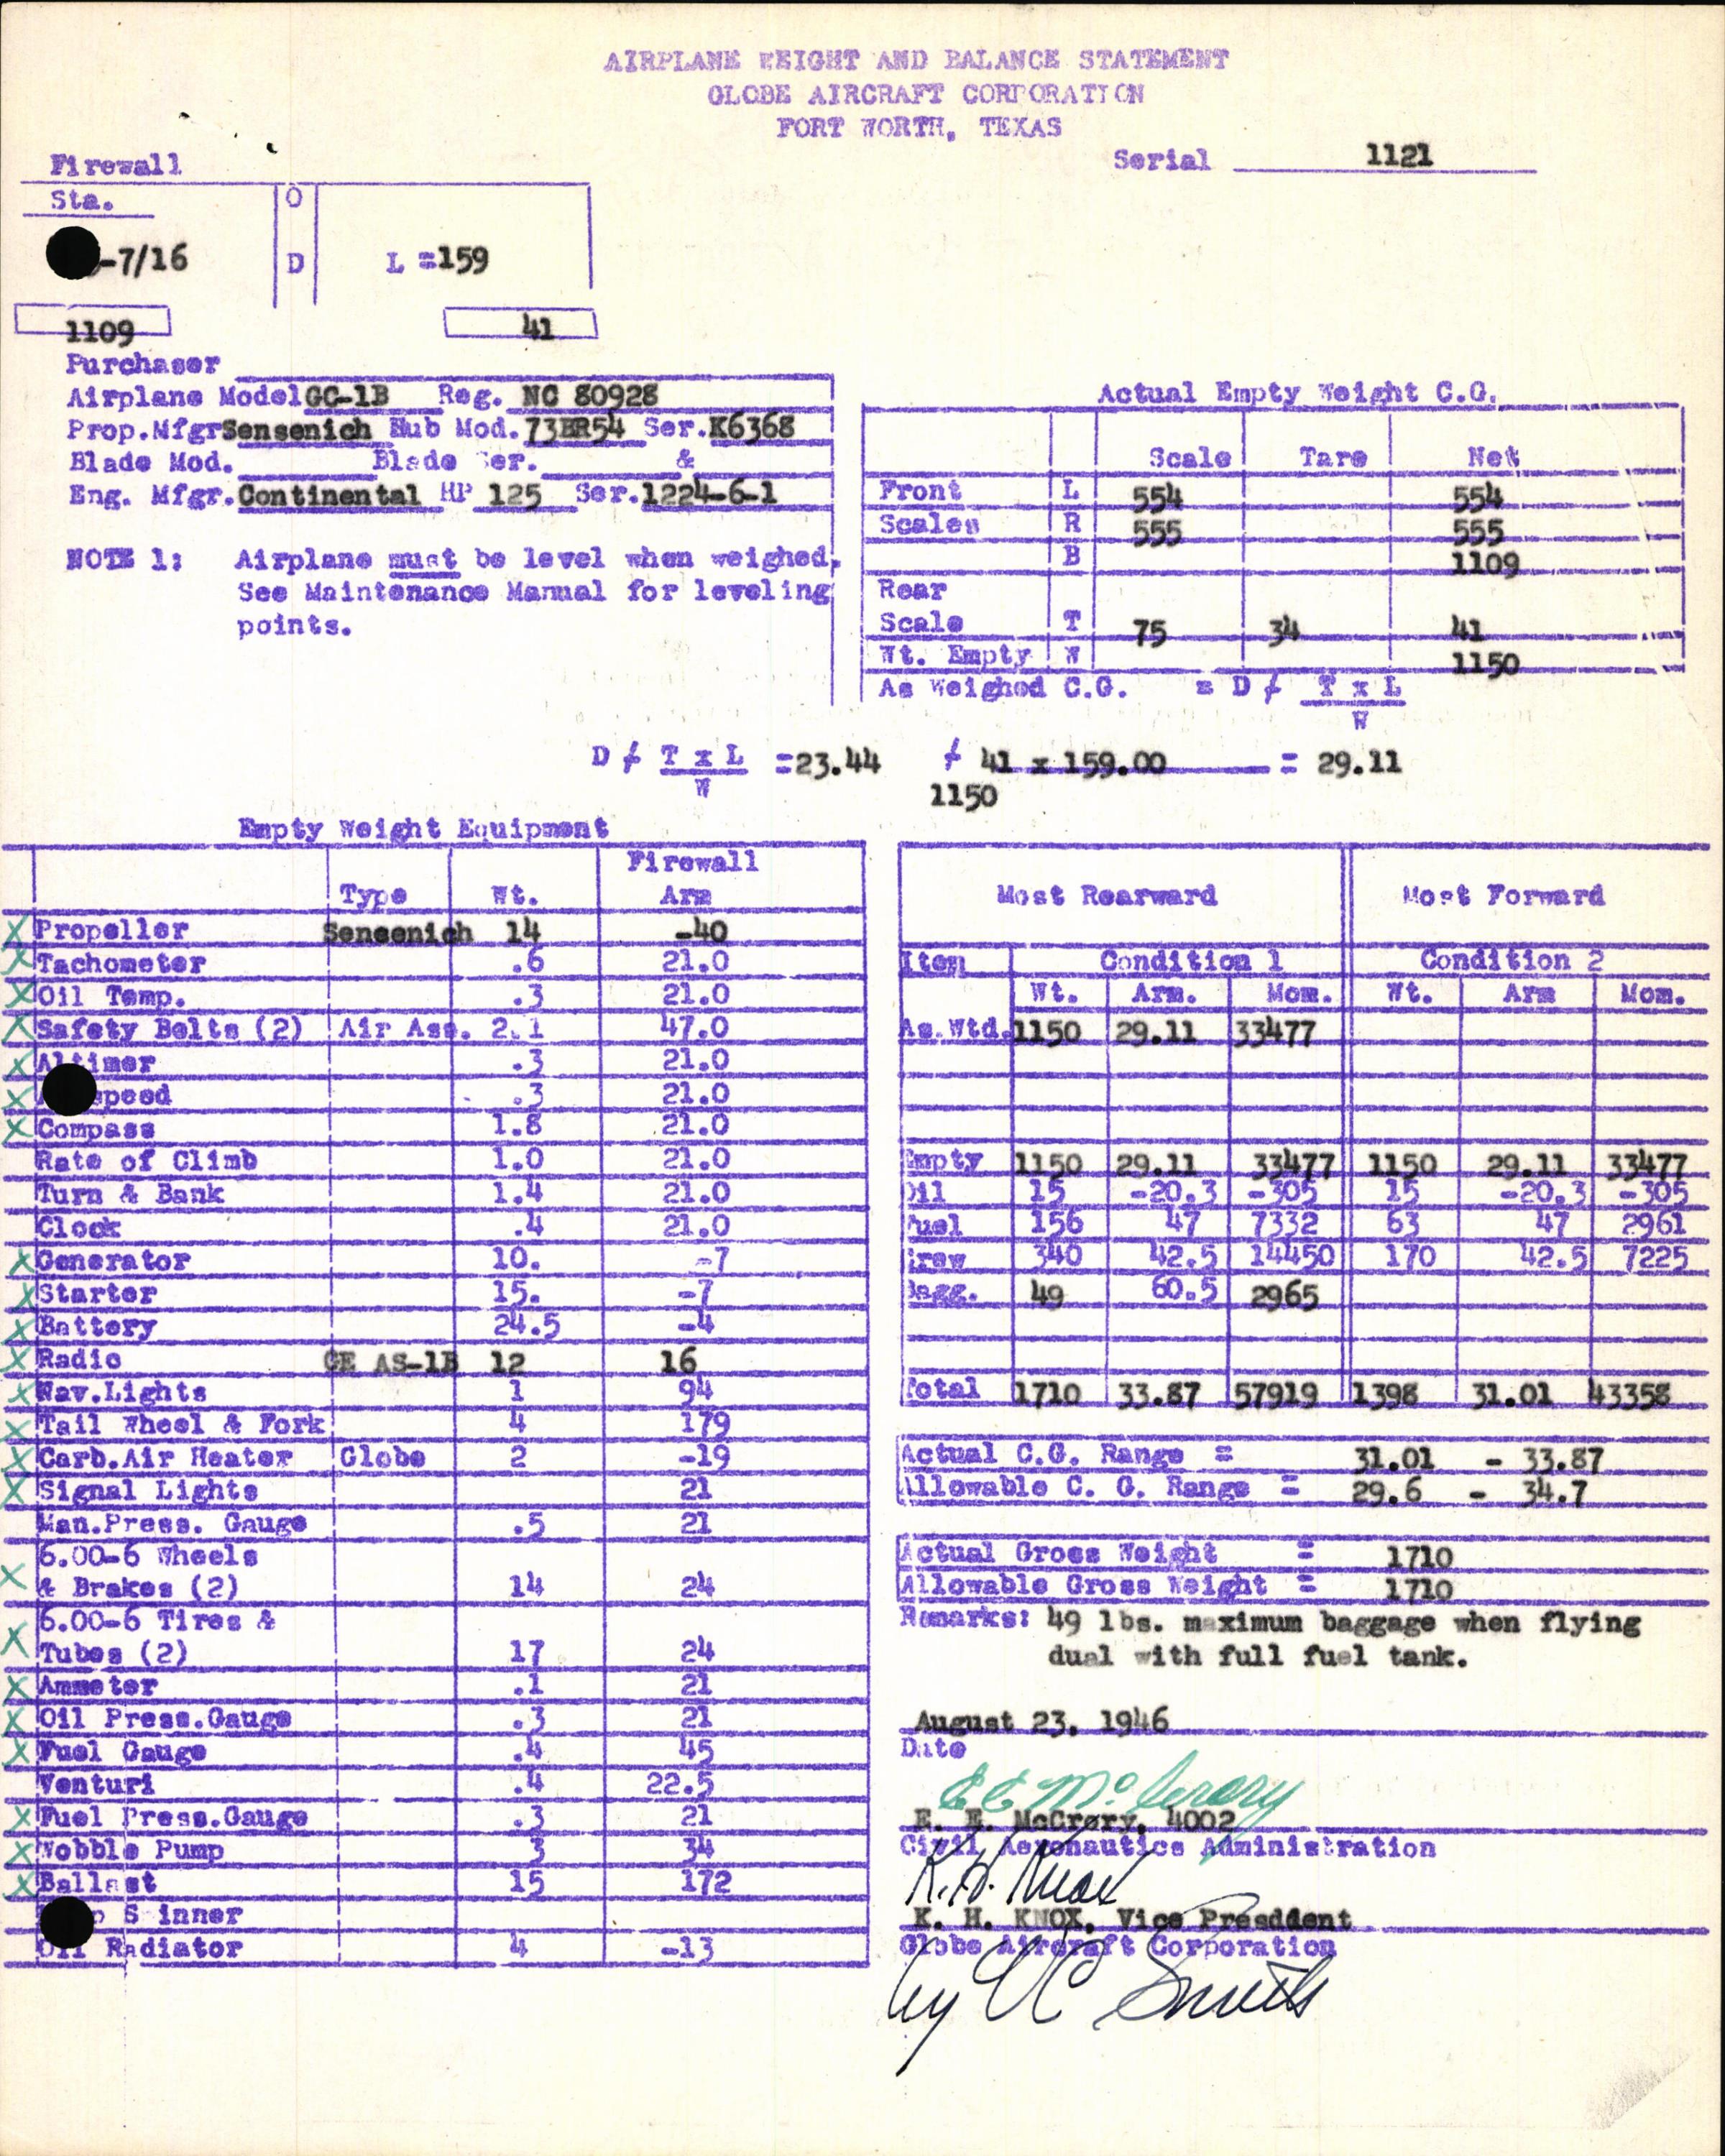 Sample page 7 from AirCorps Library document: Technical Information for Serial Number 1121